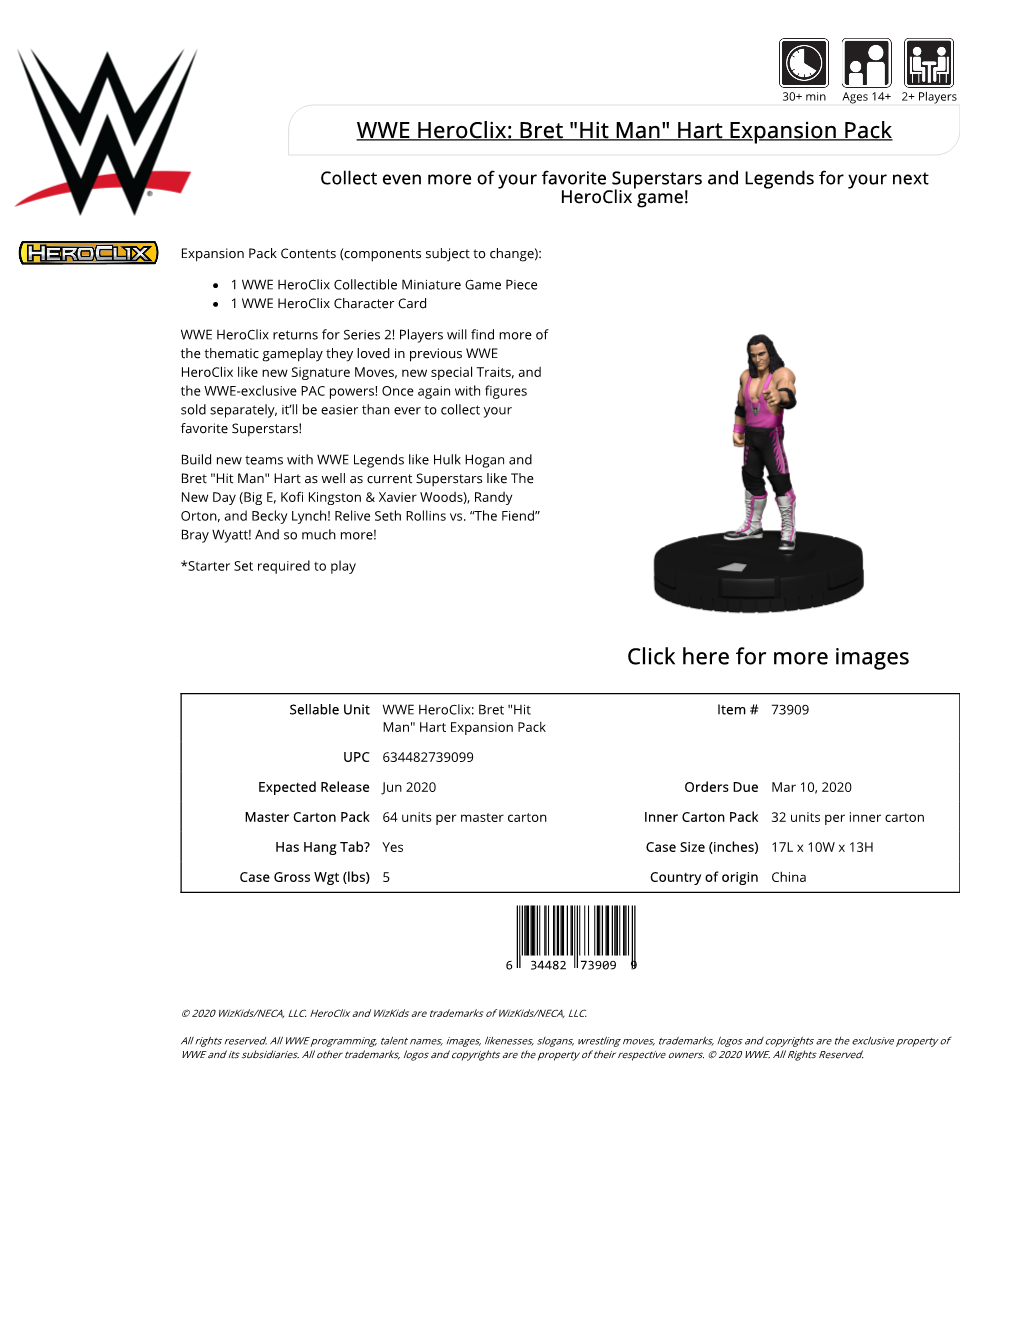 WWE Heroclix: Bret "Hit Man" Hart Expansion Pack Click Here for More